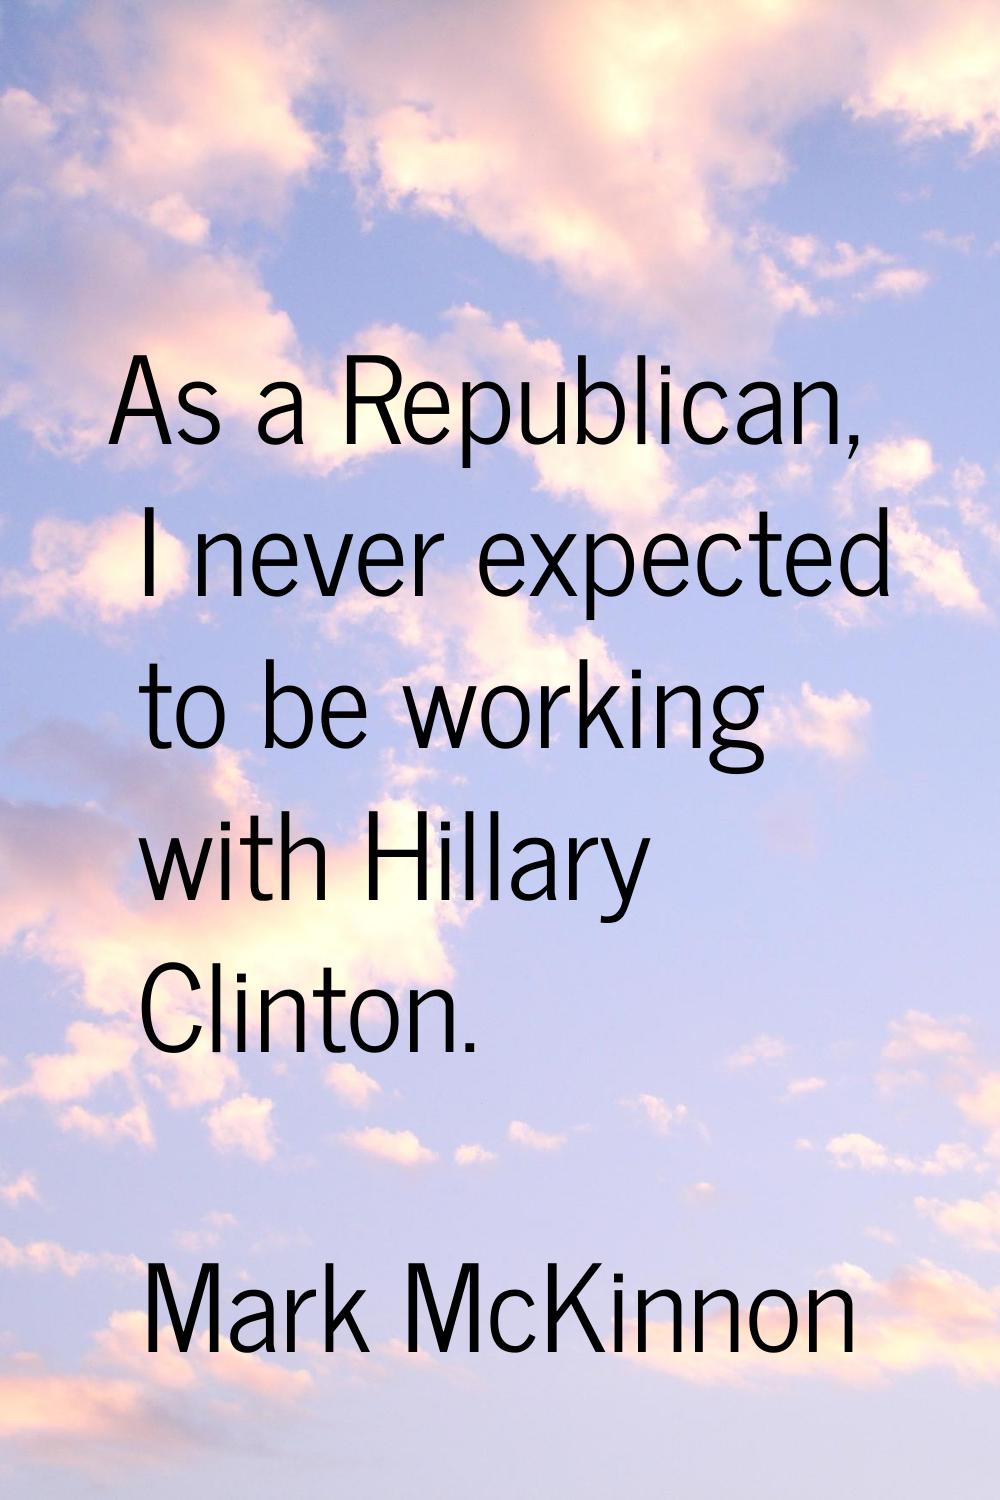 As a Republican, I never expected to be working with Hillary Clinton.